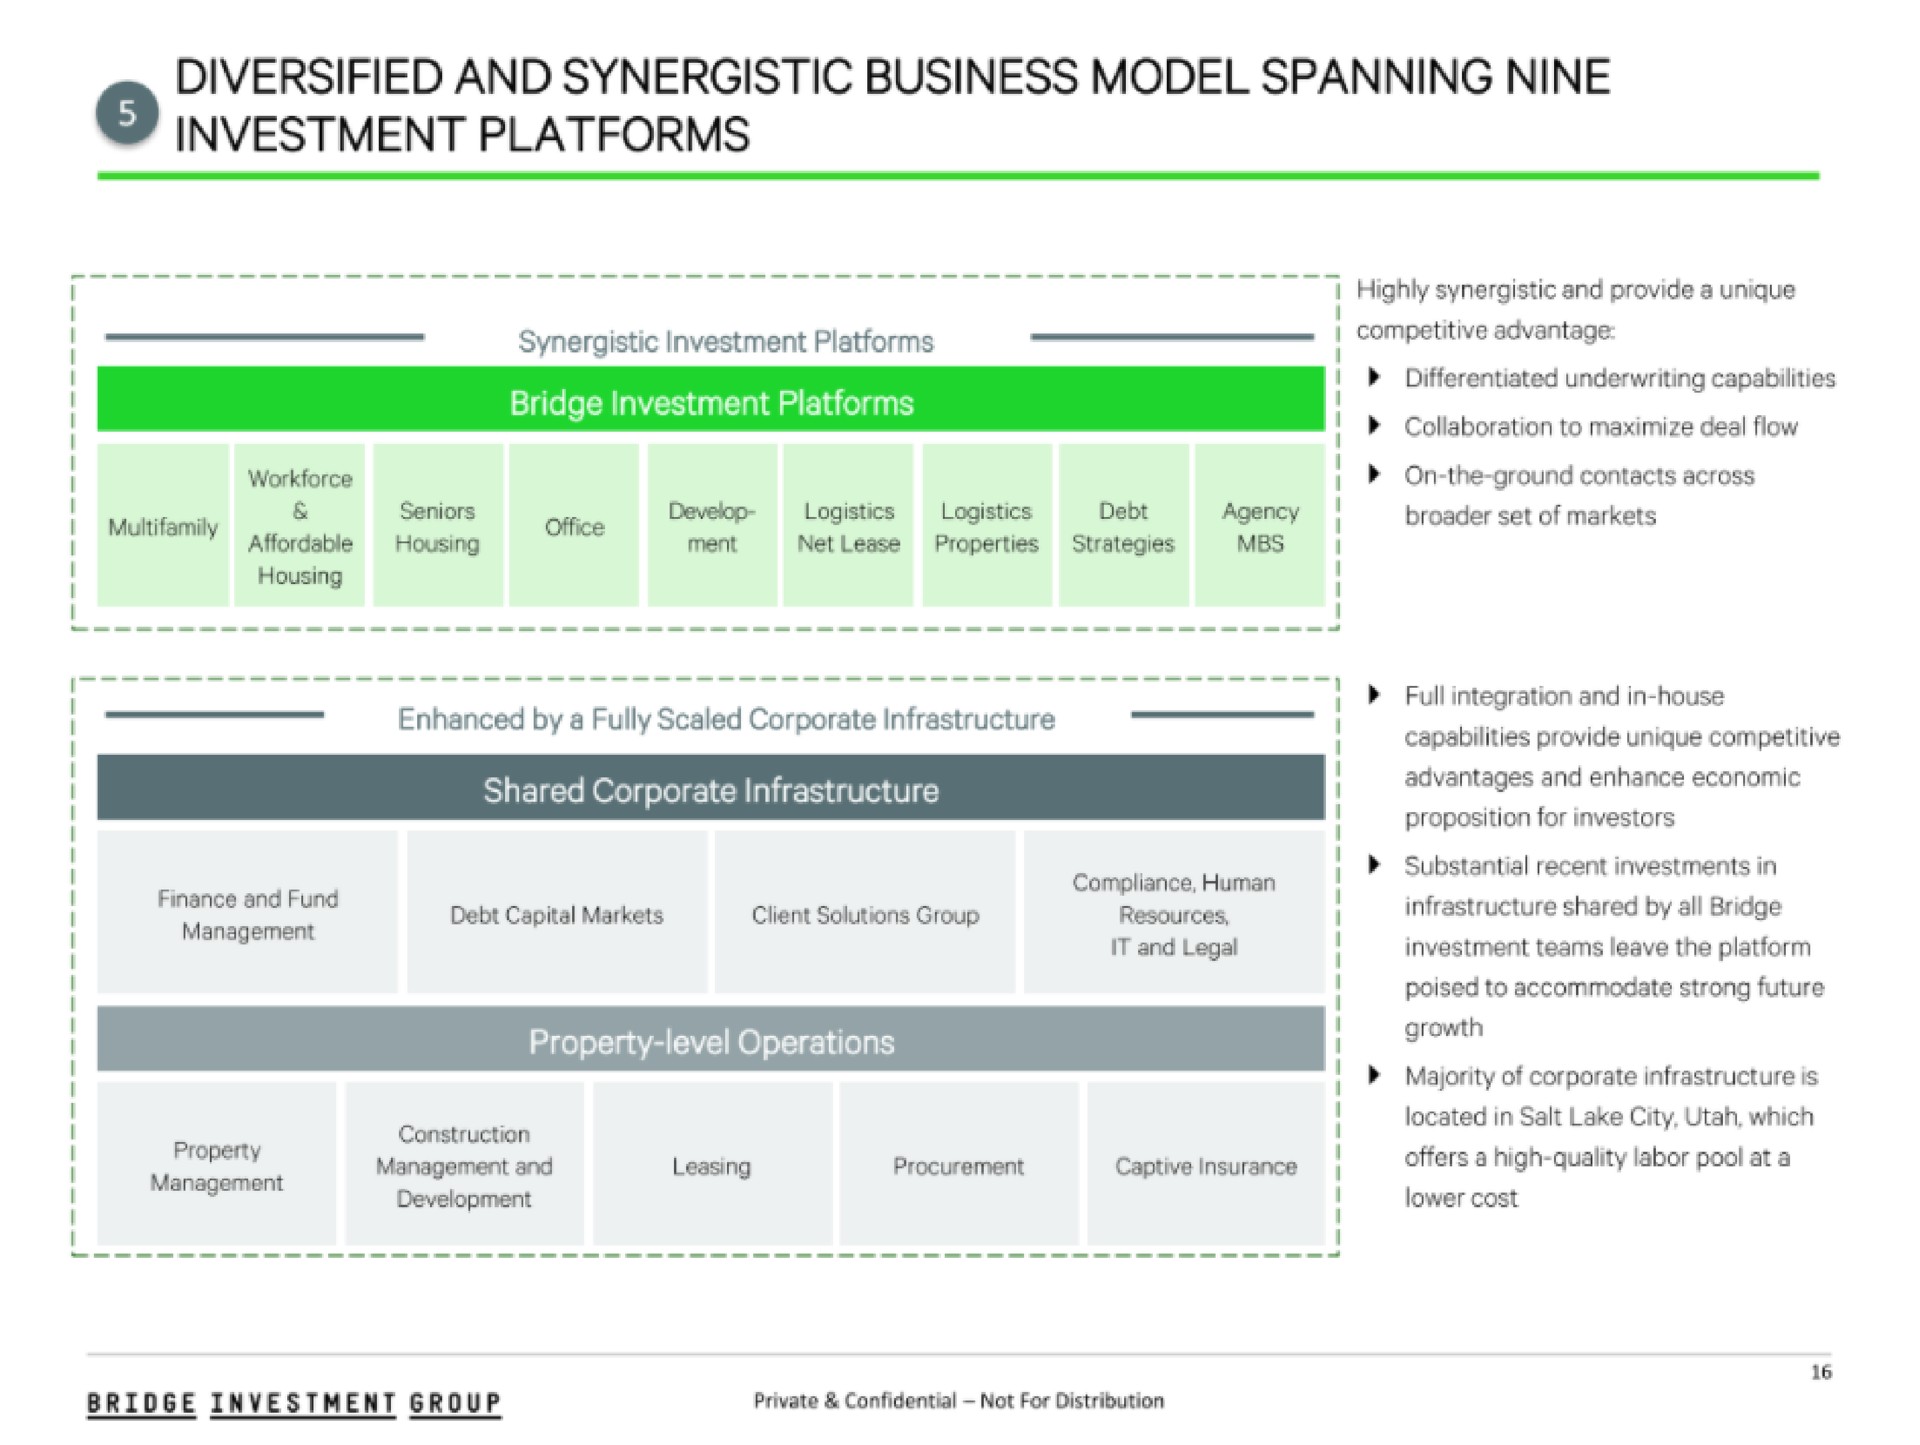 diversified and synergistic business model spanning nine investment platforms | Bridge Investment Group